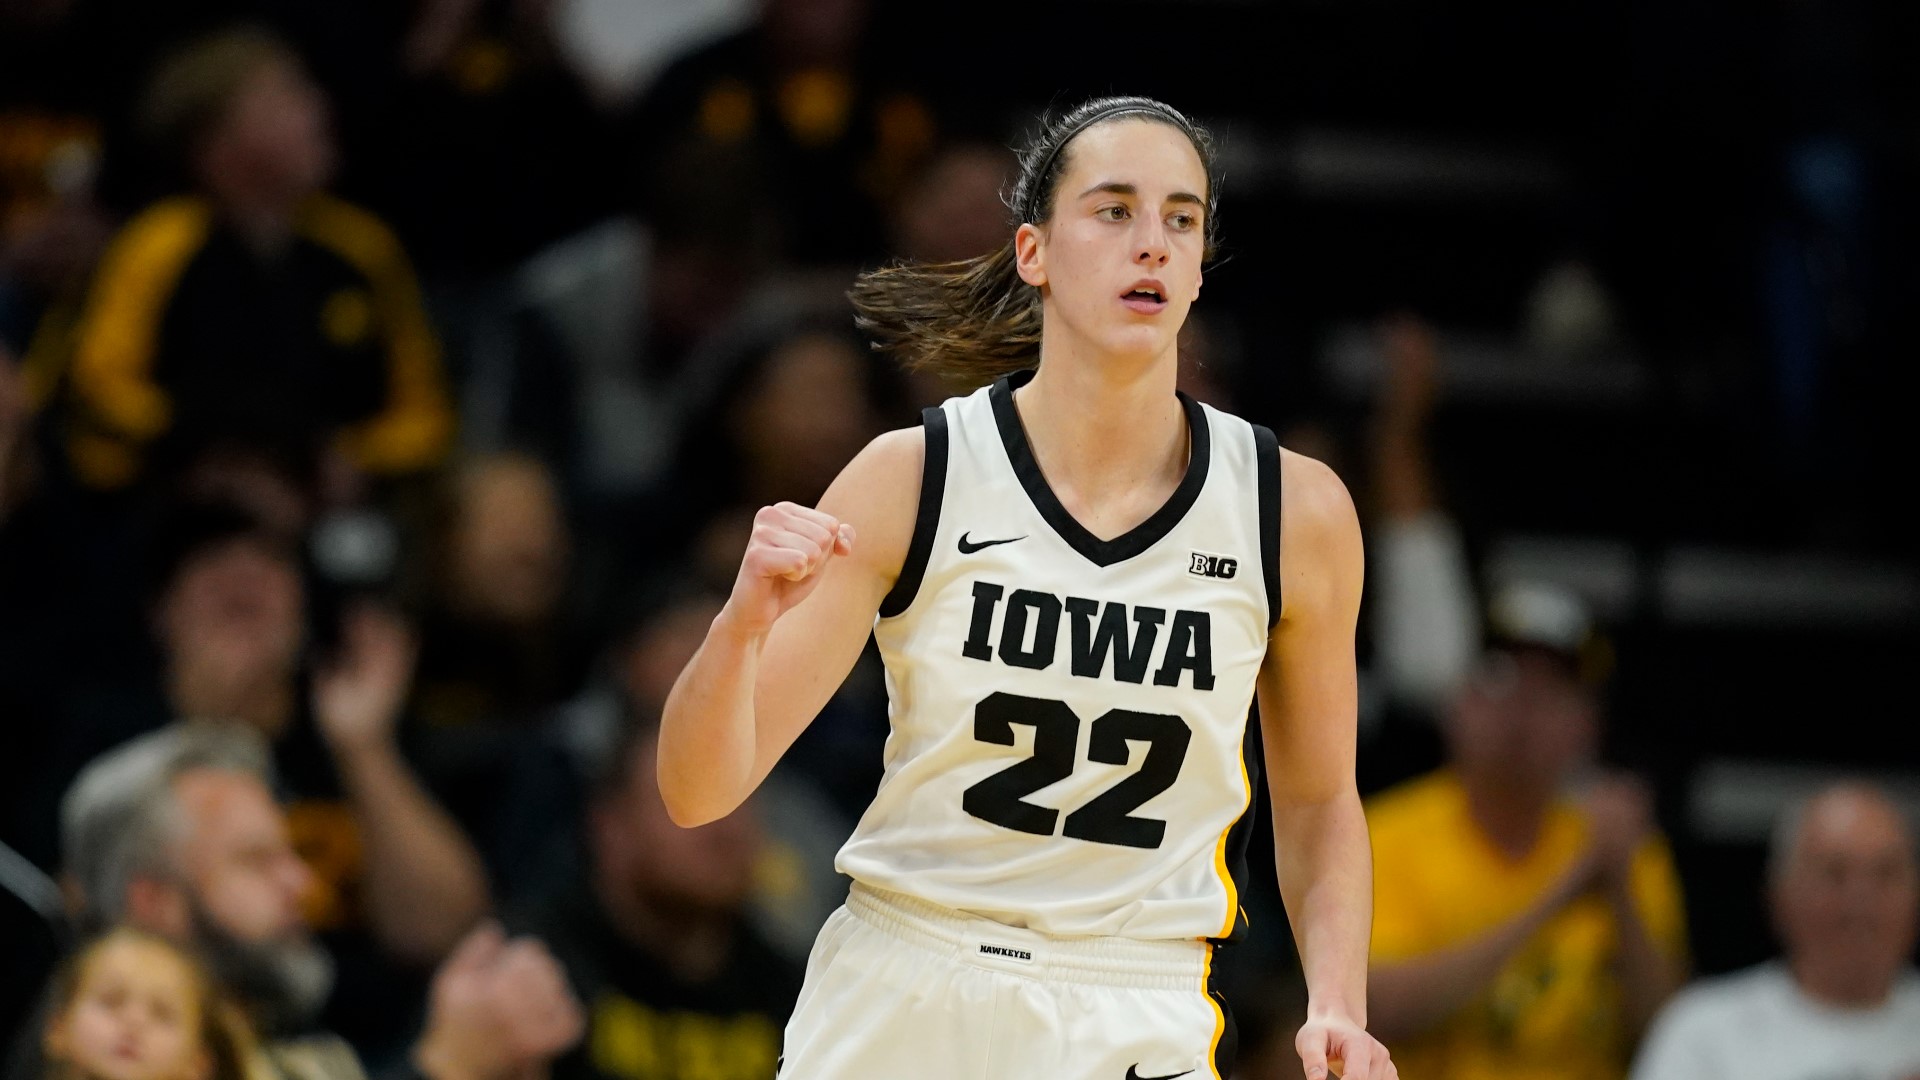 The Hawkeyes (4-1), coming off a 65-58 loss to Kansas State on Thursday night, scored a program-record 64 points in the first half,